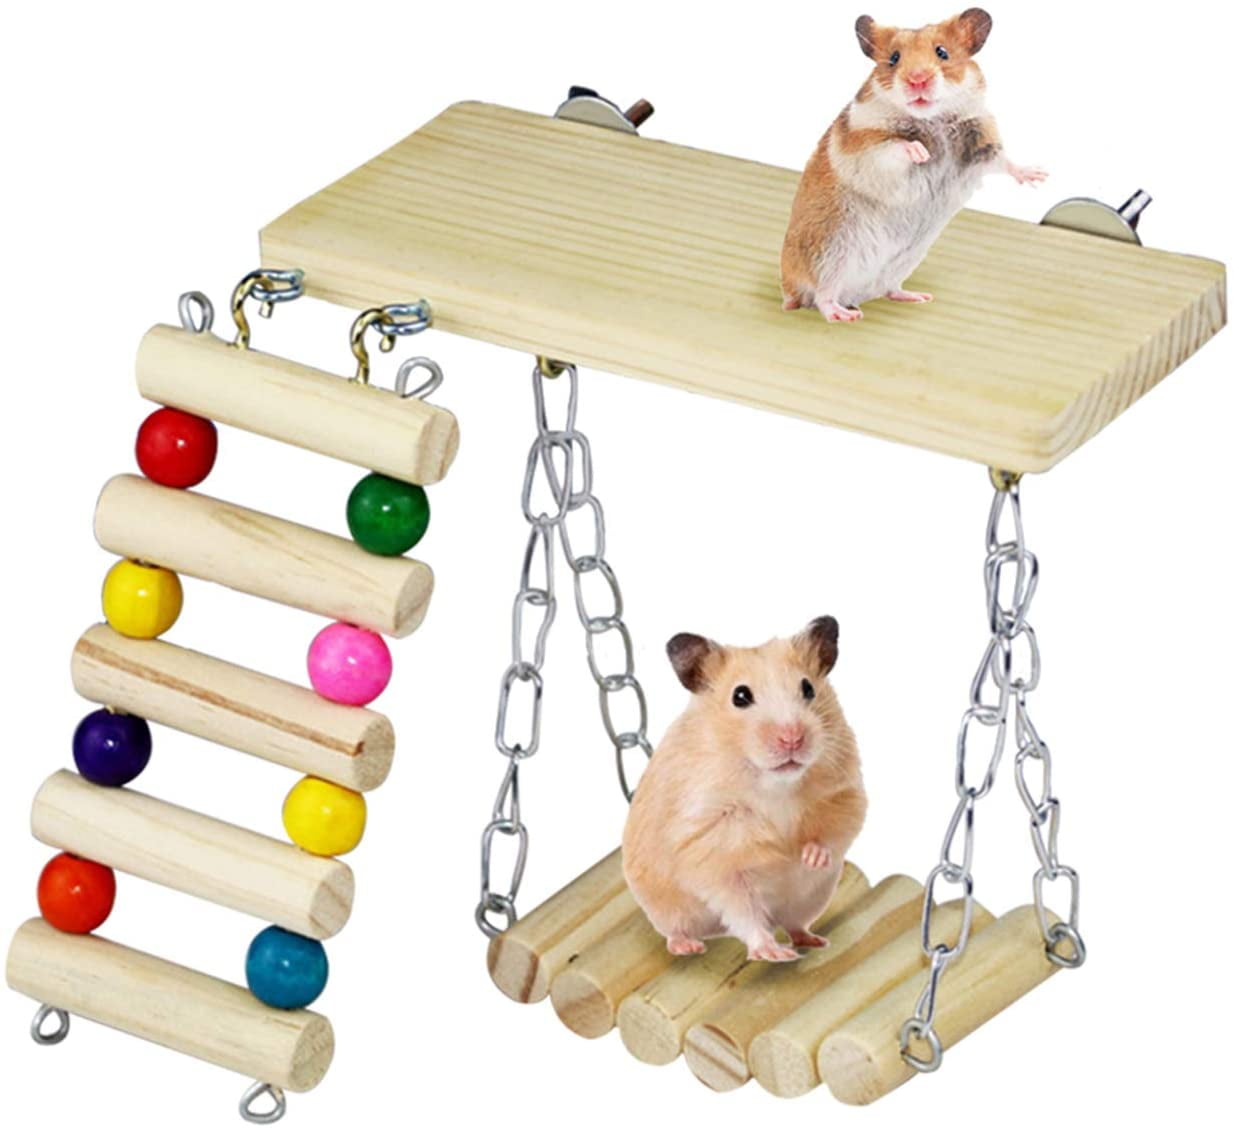 Wooden Pets Ladder Toys Cage Accessories For Hamster Bird Mouse Flexible Toy S 